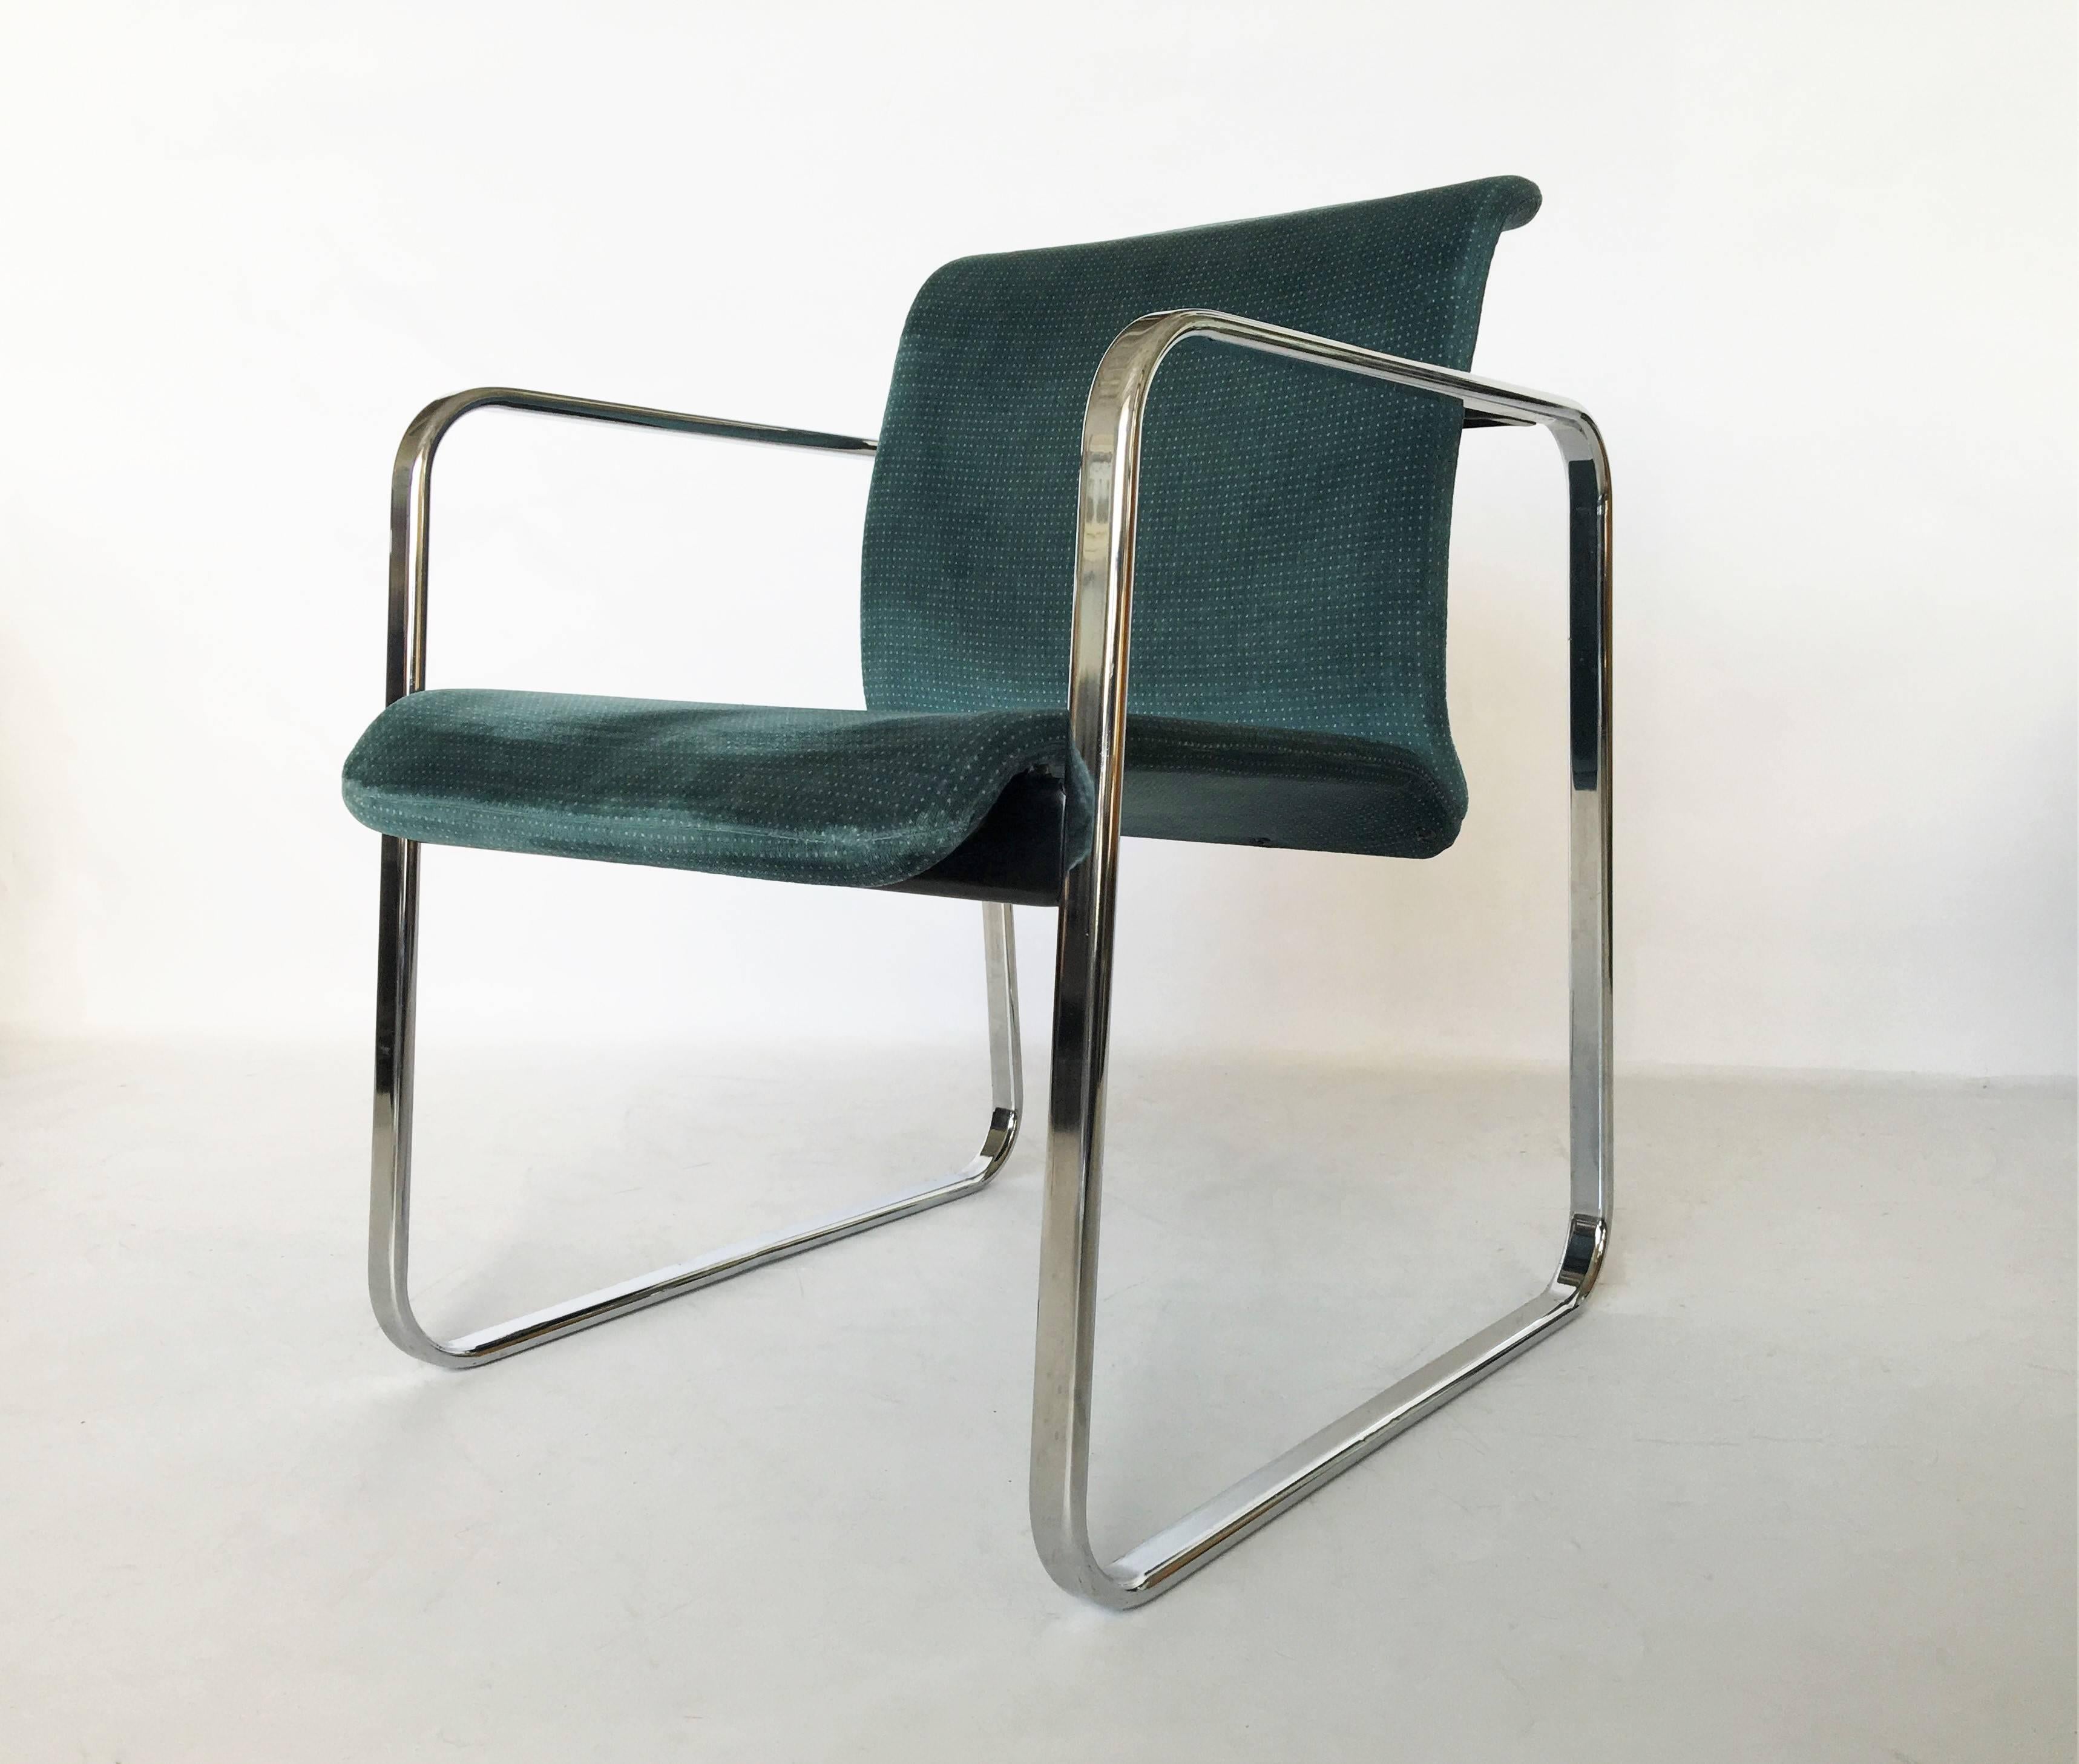 A set of eight dining chairs designed by Peter Protzman and Alexander Girard for Herman Miller, circa 1960s. The chairs feature a curved backrest, their original upholstery, tubular chrome legs and armrests.